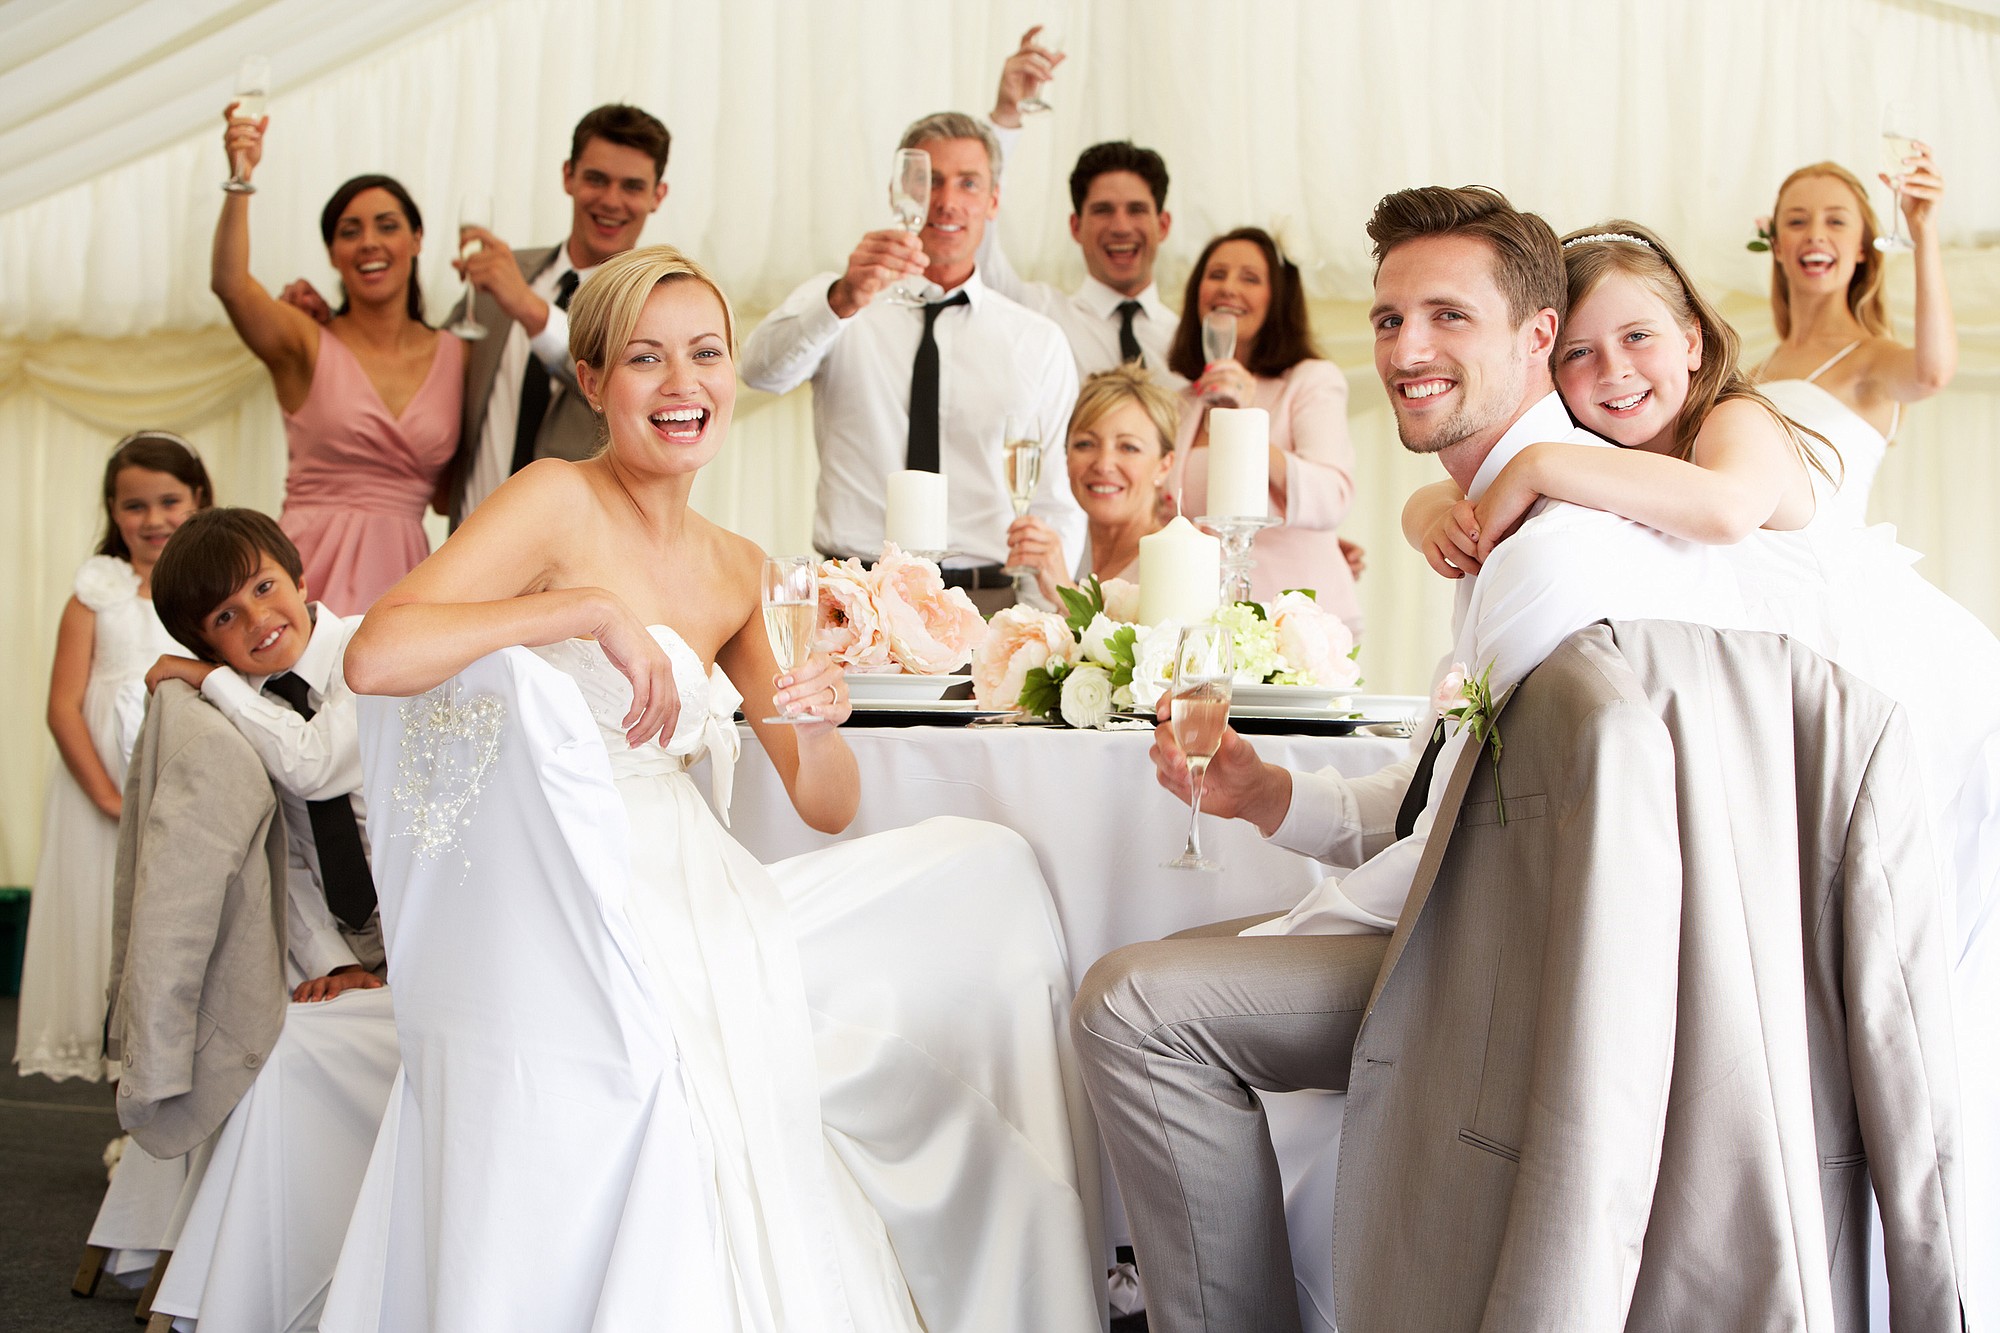 Creating a wedding guest list can be complicated.